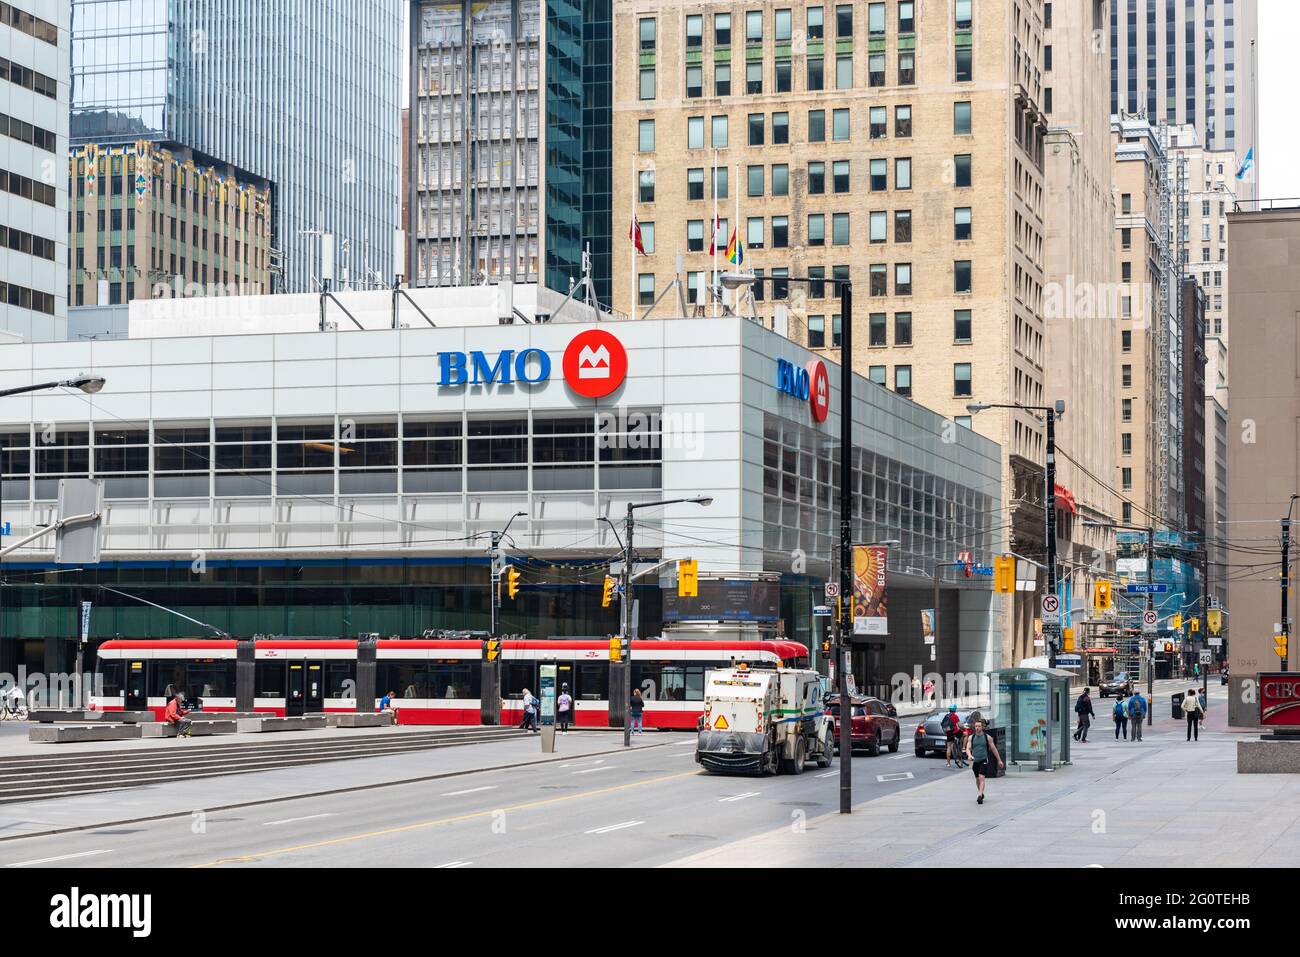 BMO or Bank of Montreal logo in modern building in the intersection of Bay and King Streets in Toronto city downtown, Canada Stock Photo